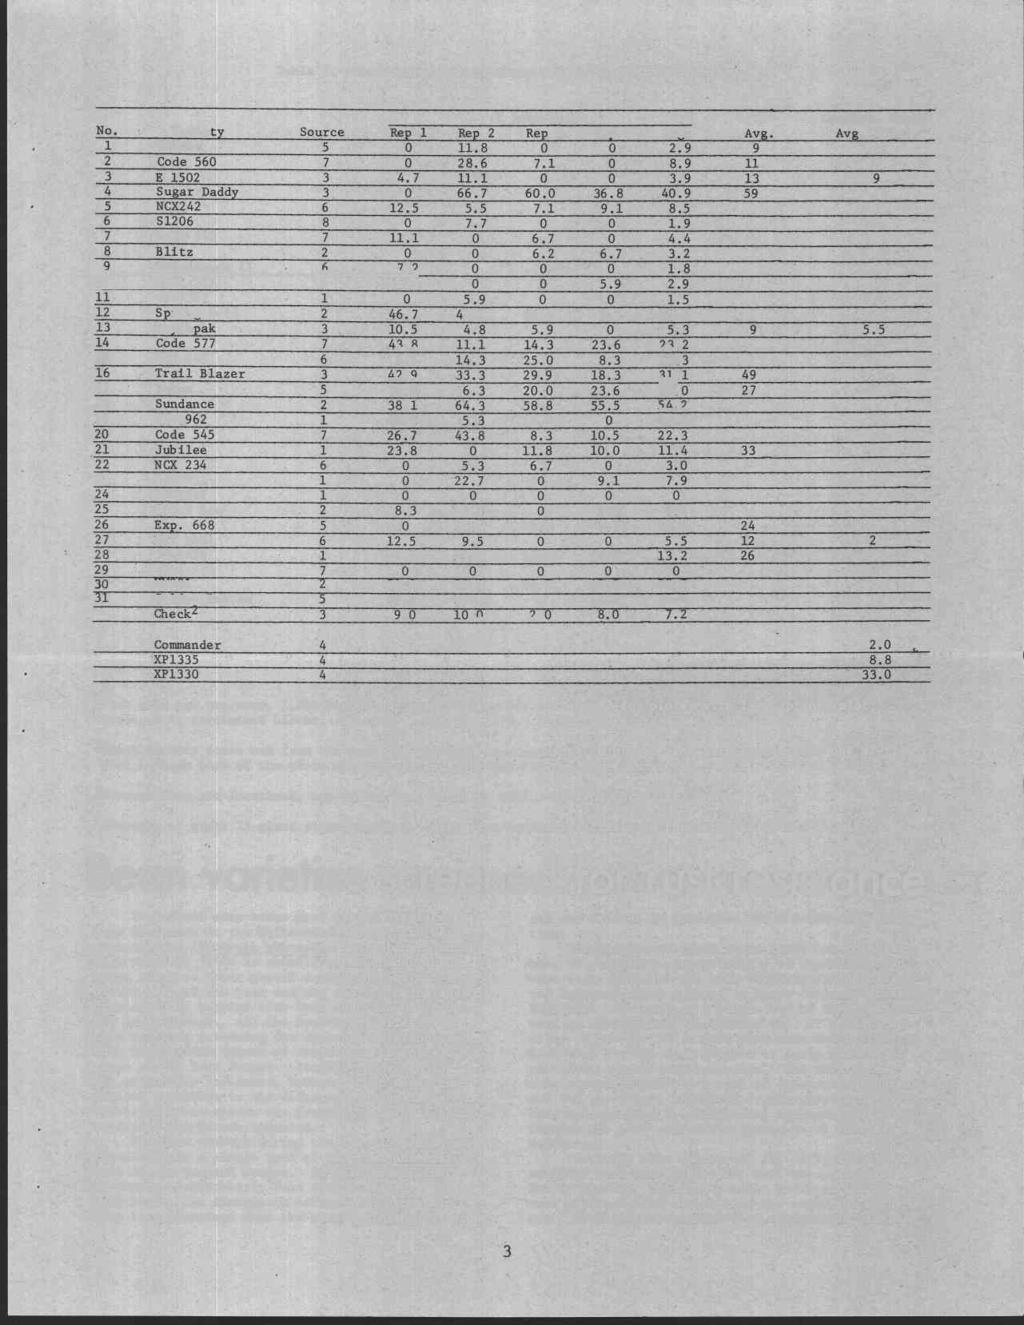 Table 2. Head Smut Susceptibility Trial, Scio, Oregon, 19731 1 Infection 1972-' Commerc. Plots4 No. Vane ty Source Rep 1 Rej2 Rep 3 Ren 4 Avg. Avg. Avg. % Inf. 1 Goldie 5 0 11.8 0 0 2.